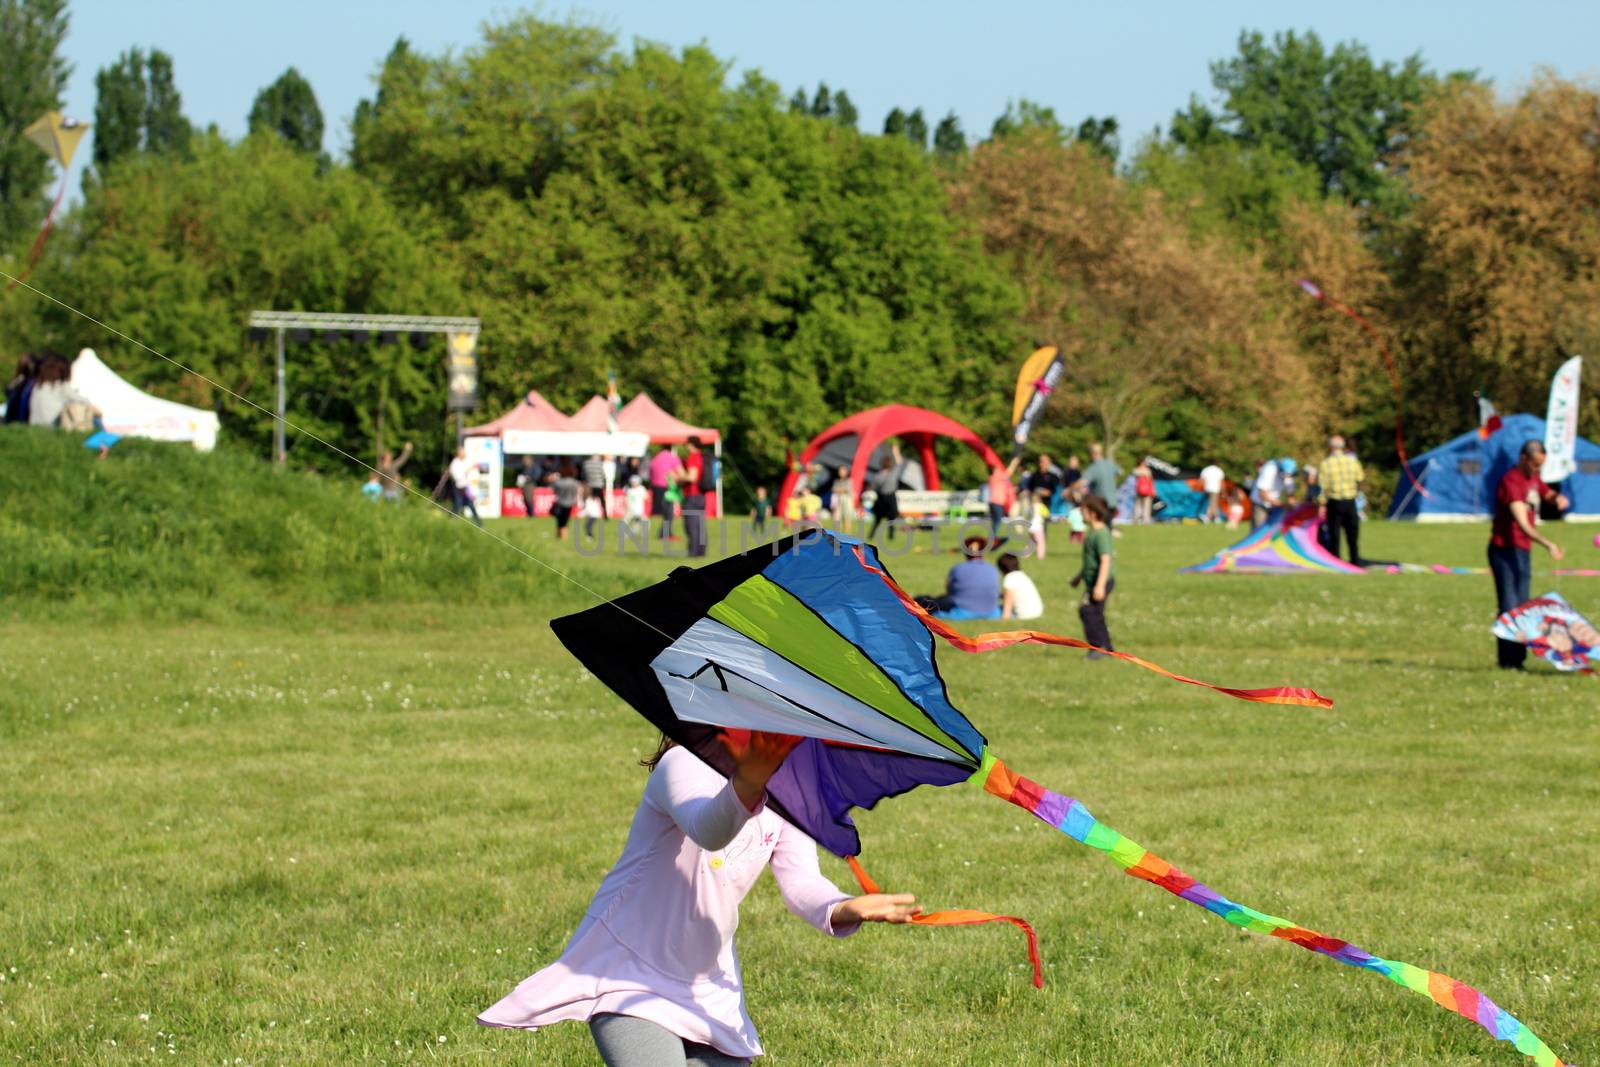 A little girl who play with the kite